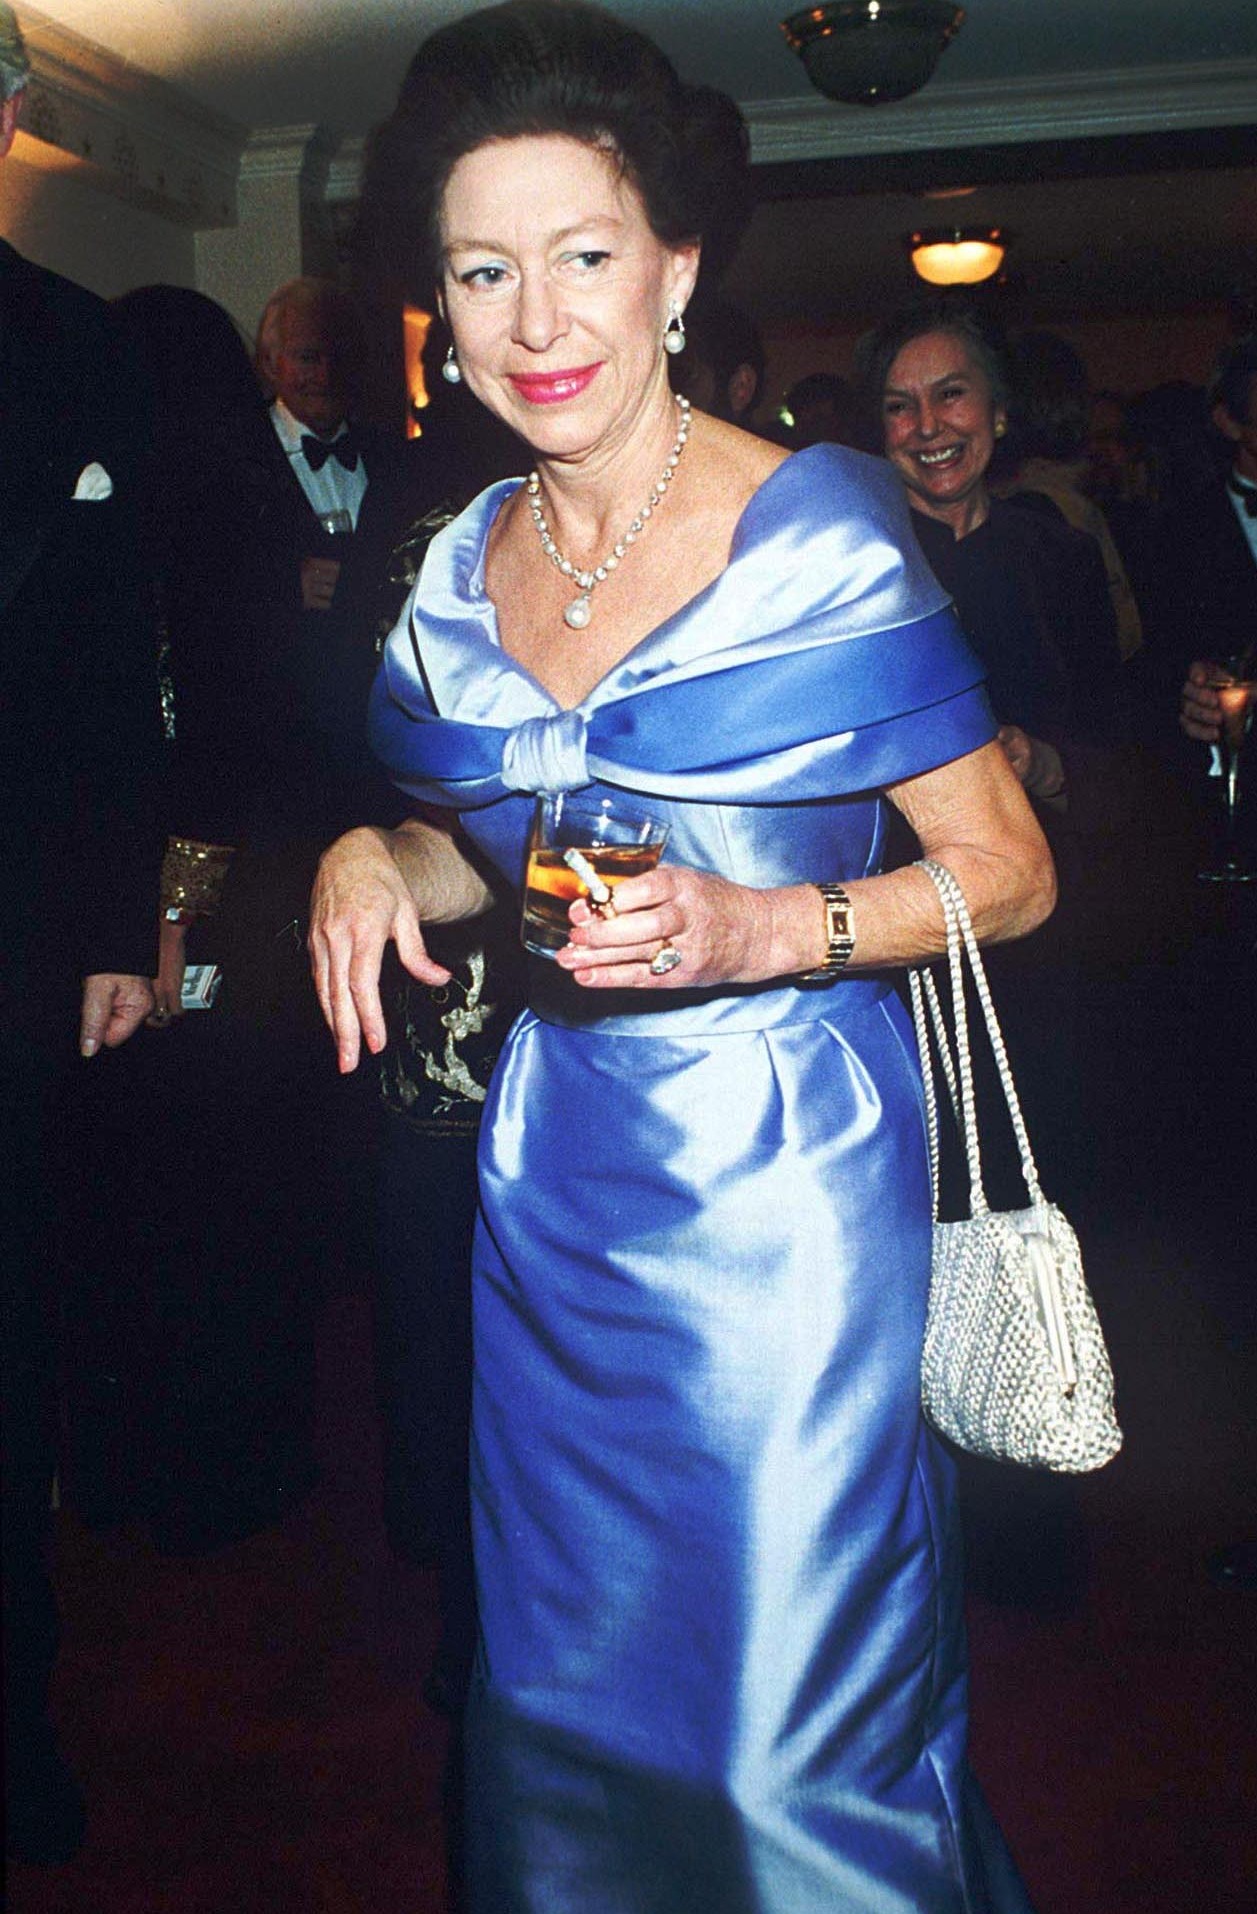 Glamorous Margaret, pictured in 1991, reportedly cut down from 60 cigarettes a day to 30 after having surgery to remove part of her lung